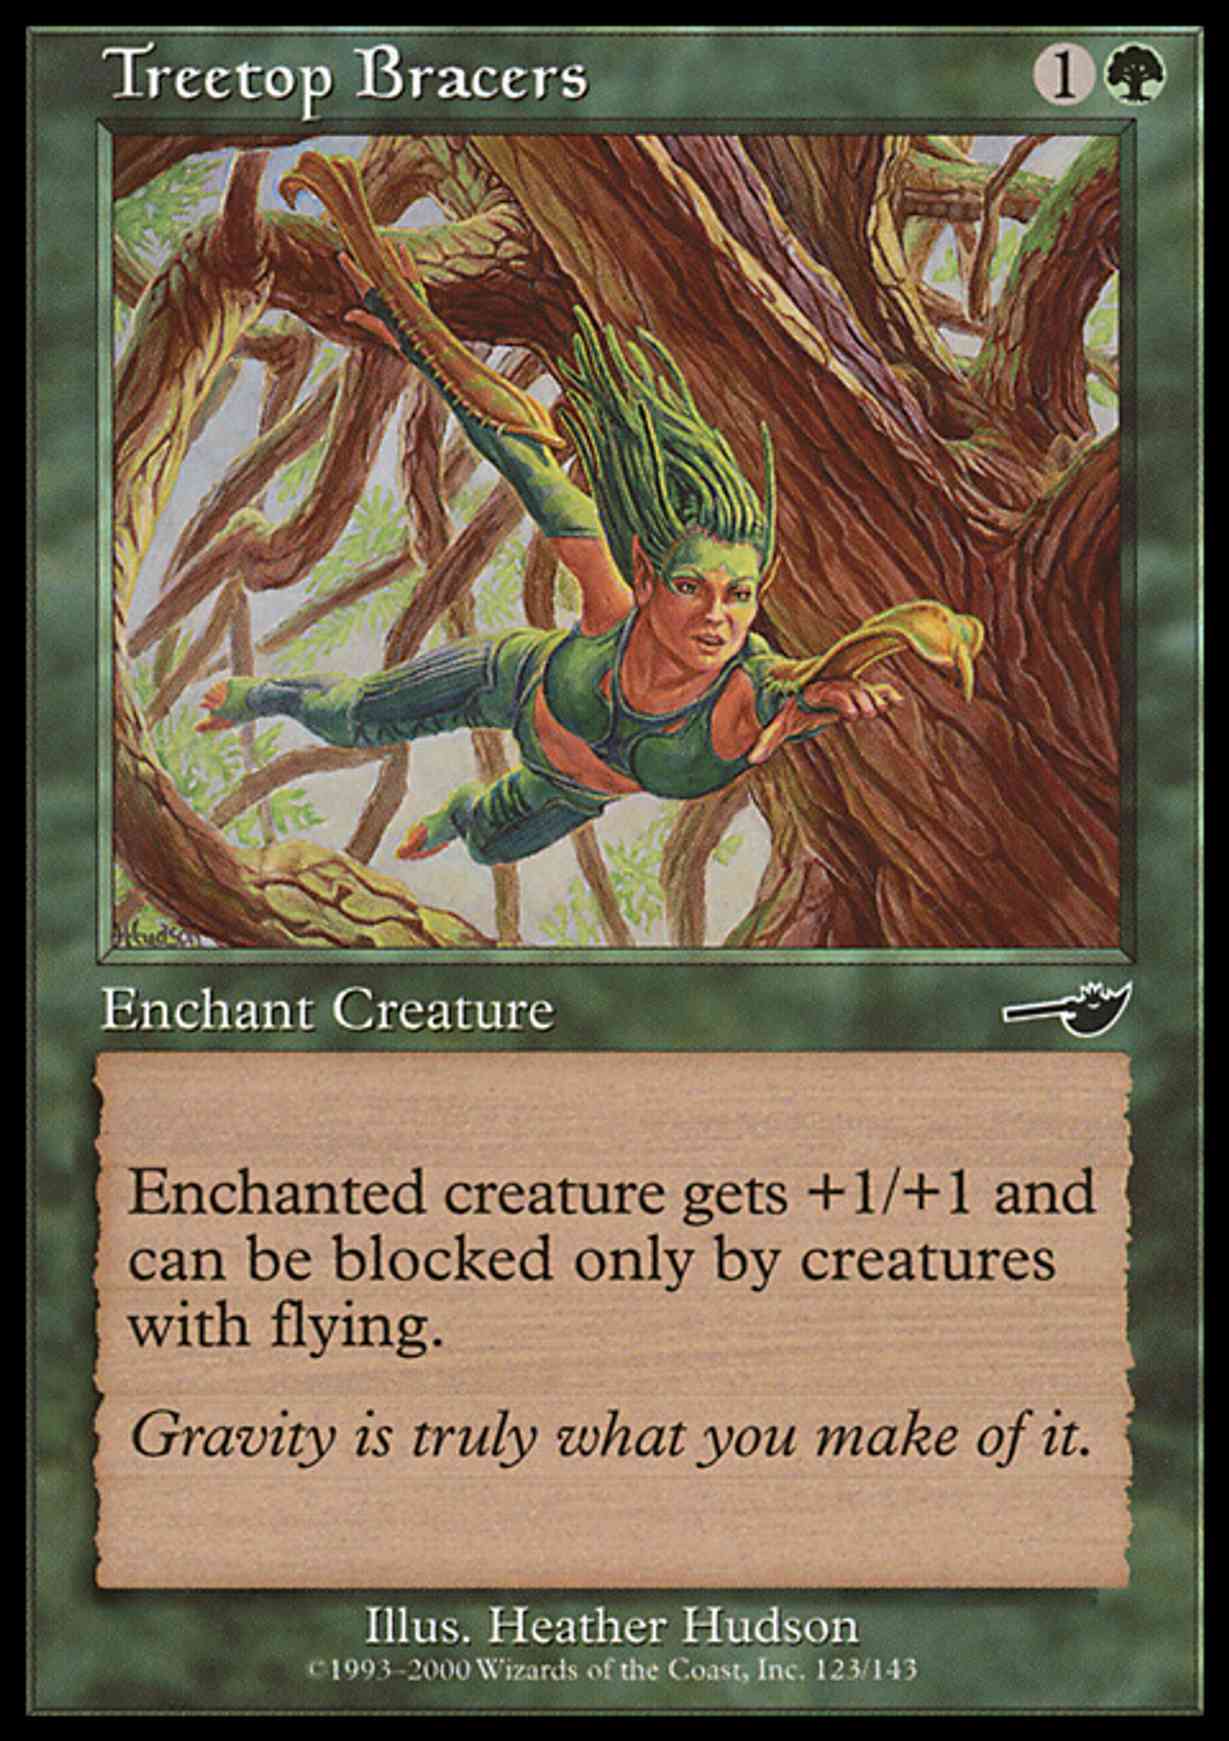 Treetop Bracers magic card front